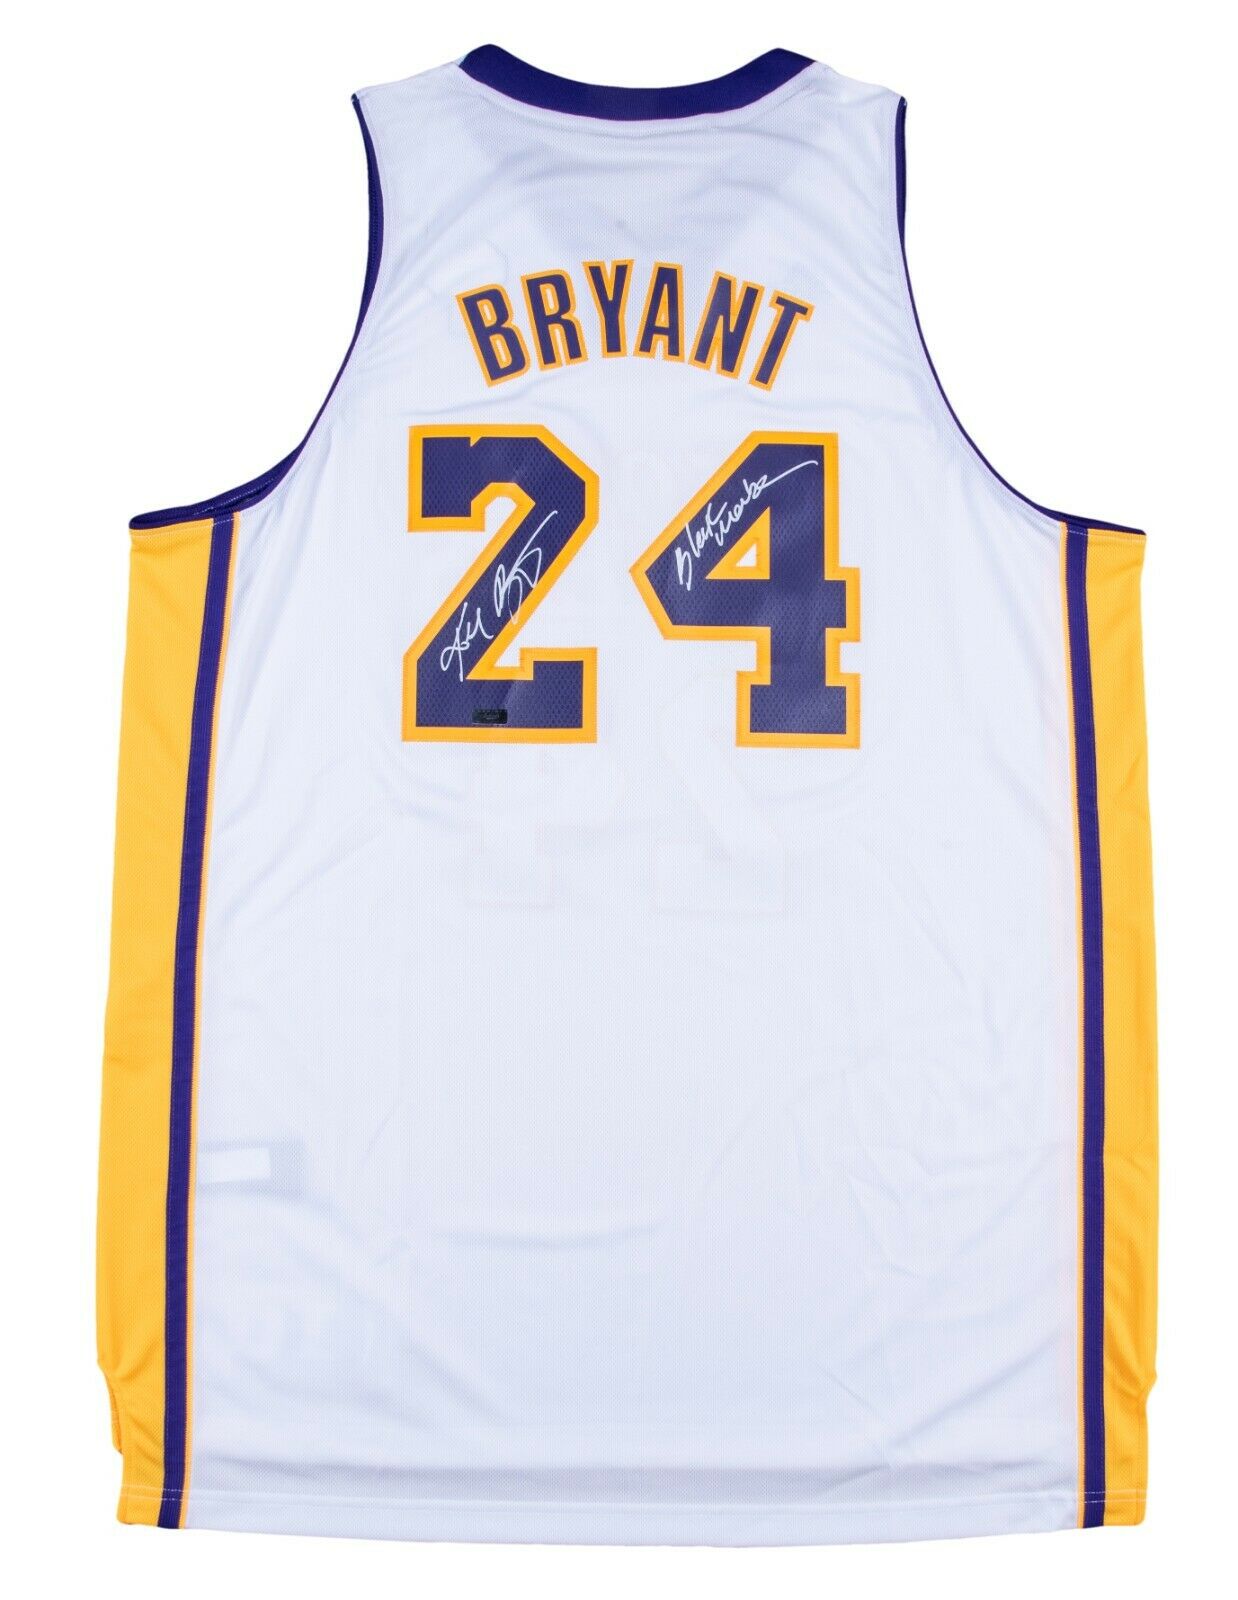 Kobe Bryant Authentic Nike Lakers Jersey New With Tags. #24 with WISH Patch